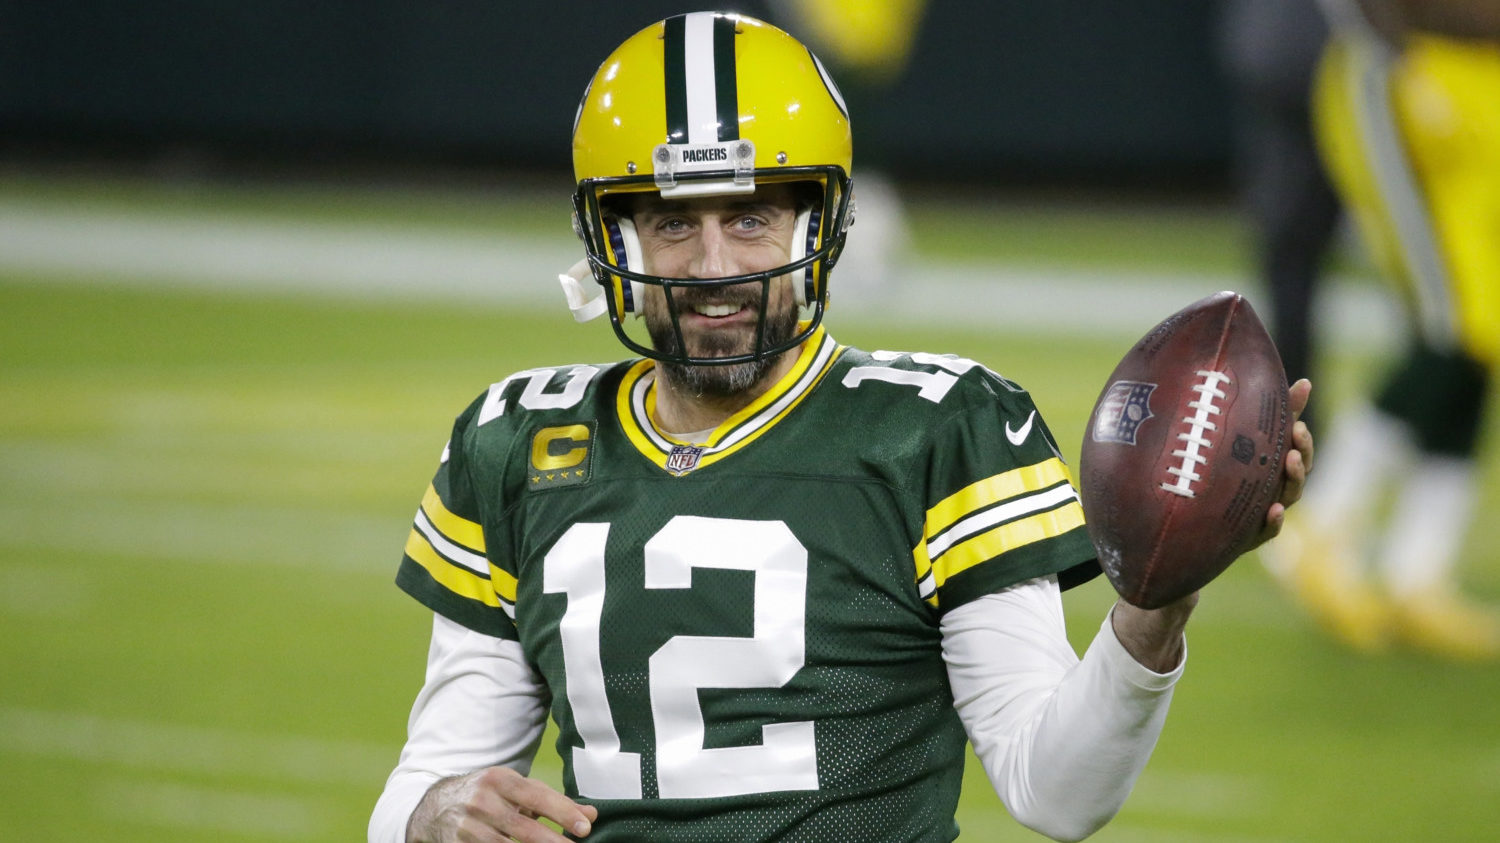 Aaron Rodgers will replace Alex Trebek on Jeopardy! as guest host